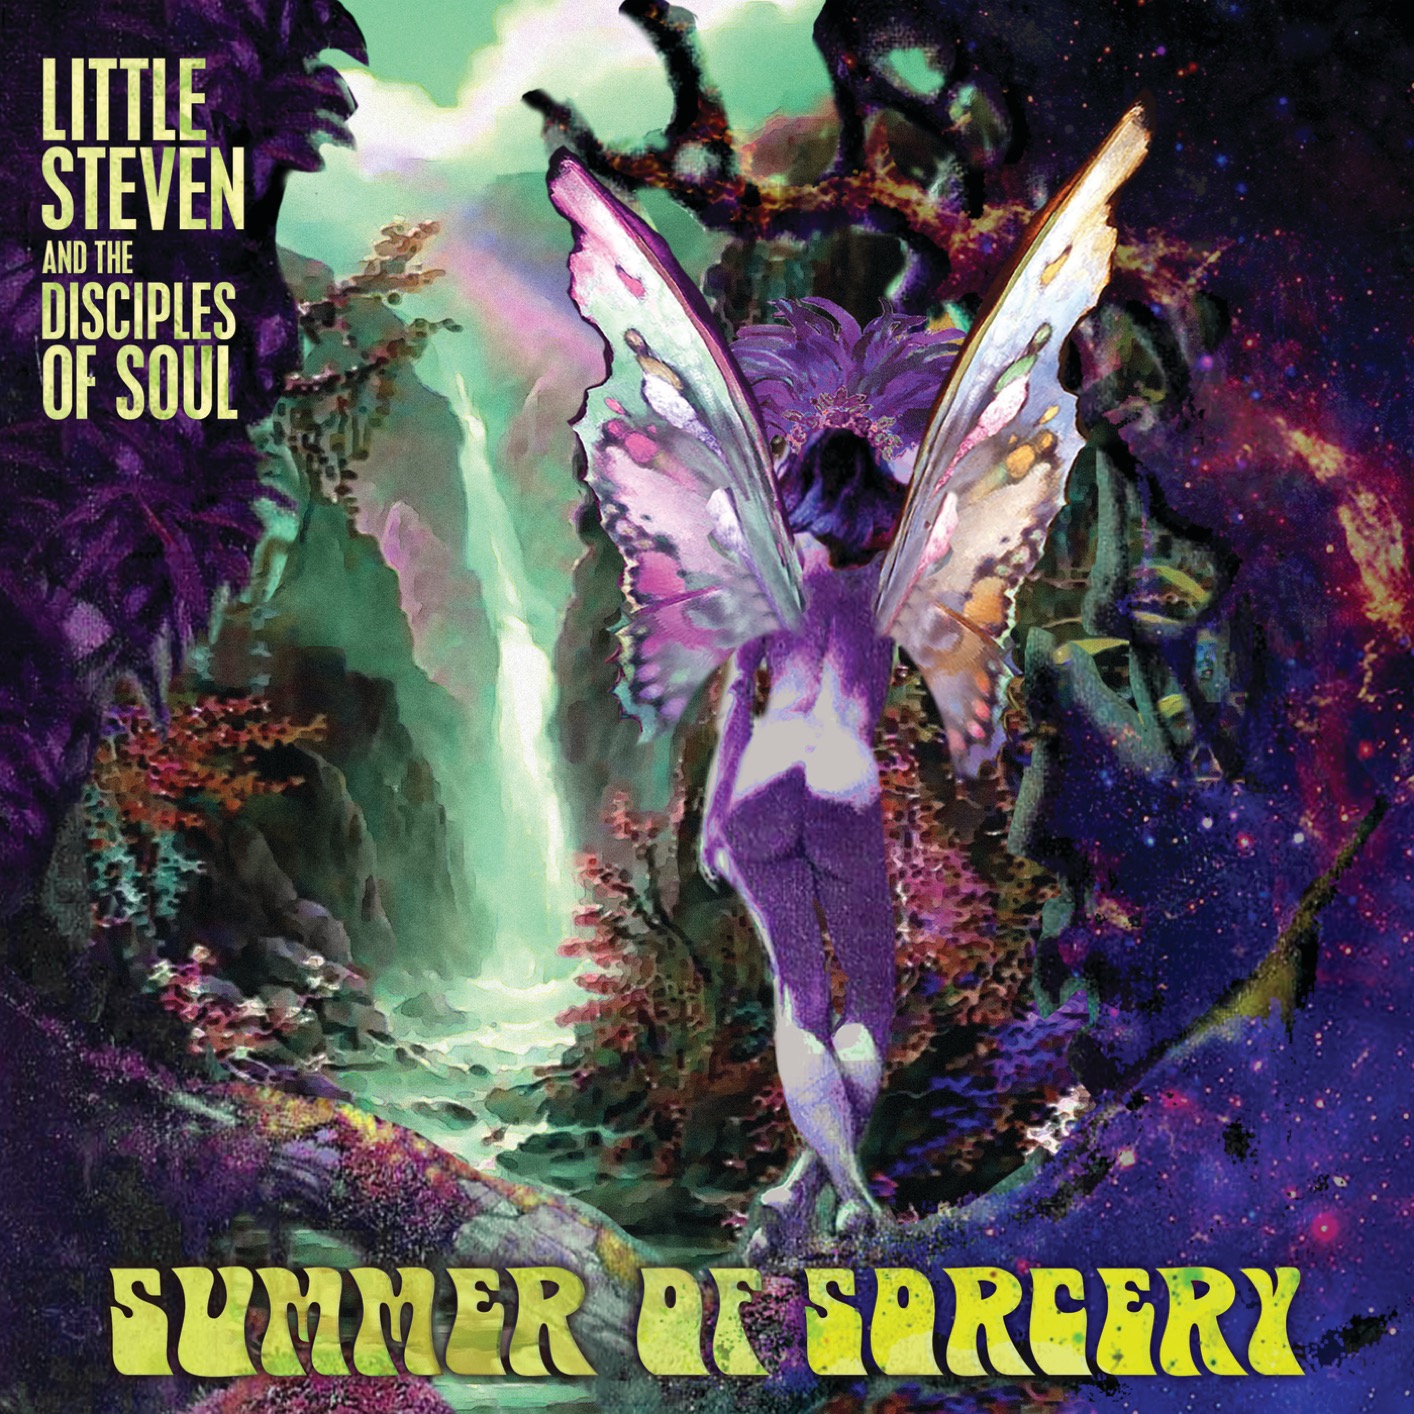 Little Steven and The Disciples of Soul - Summer Of Sorcery (2019) [FLAC 24bit/96kHz]